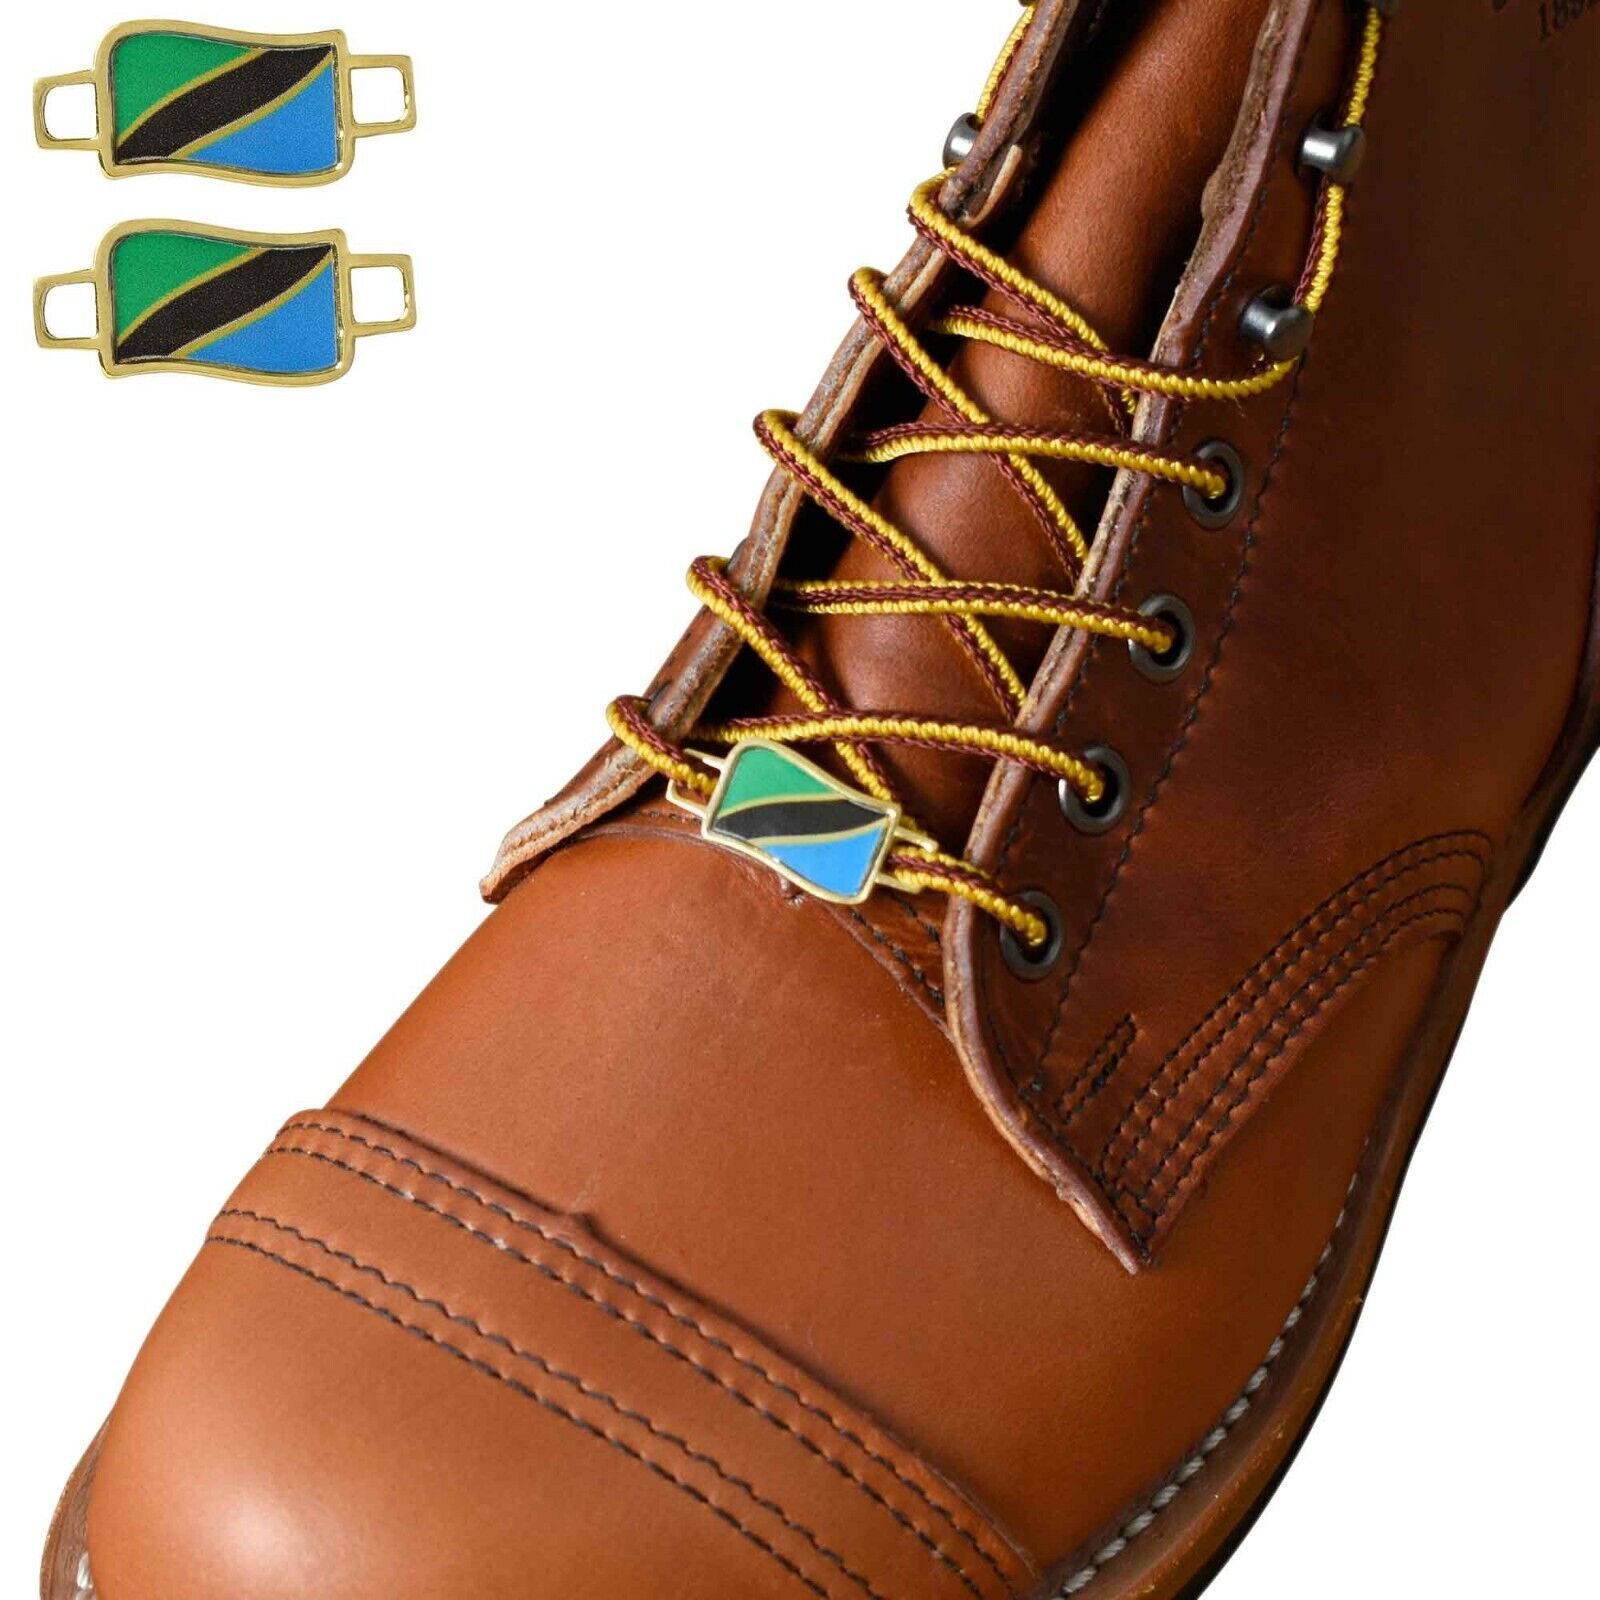 Tanzania Flags Shoes Boot Shoelace Keeper Holder Charm BrooklynMaker